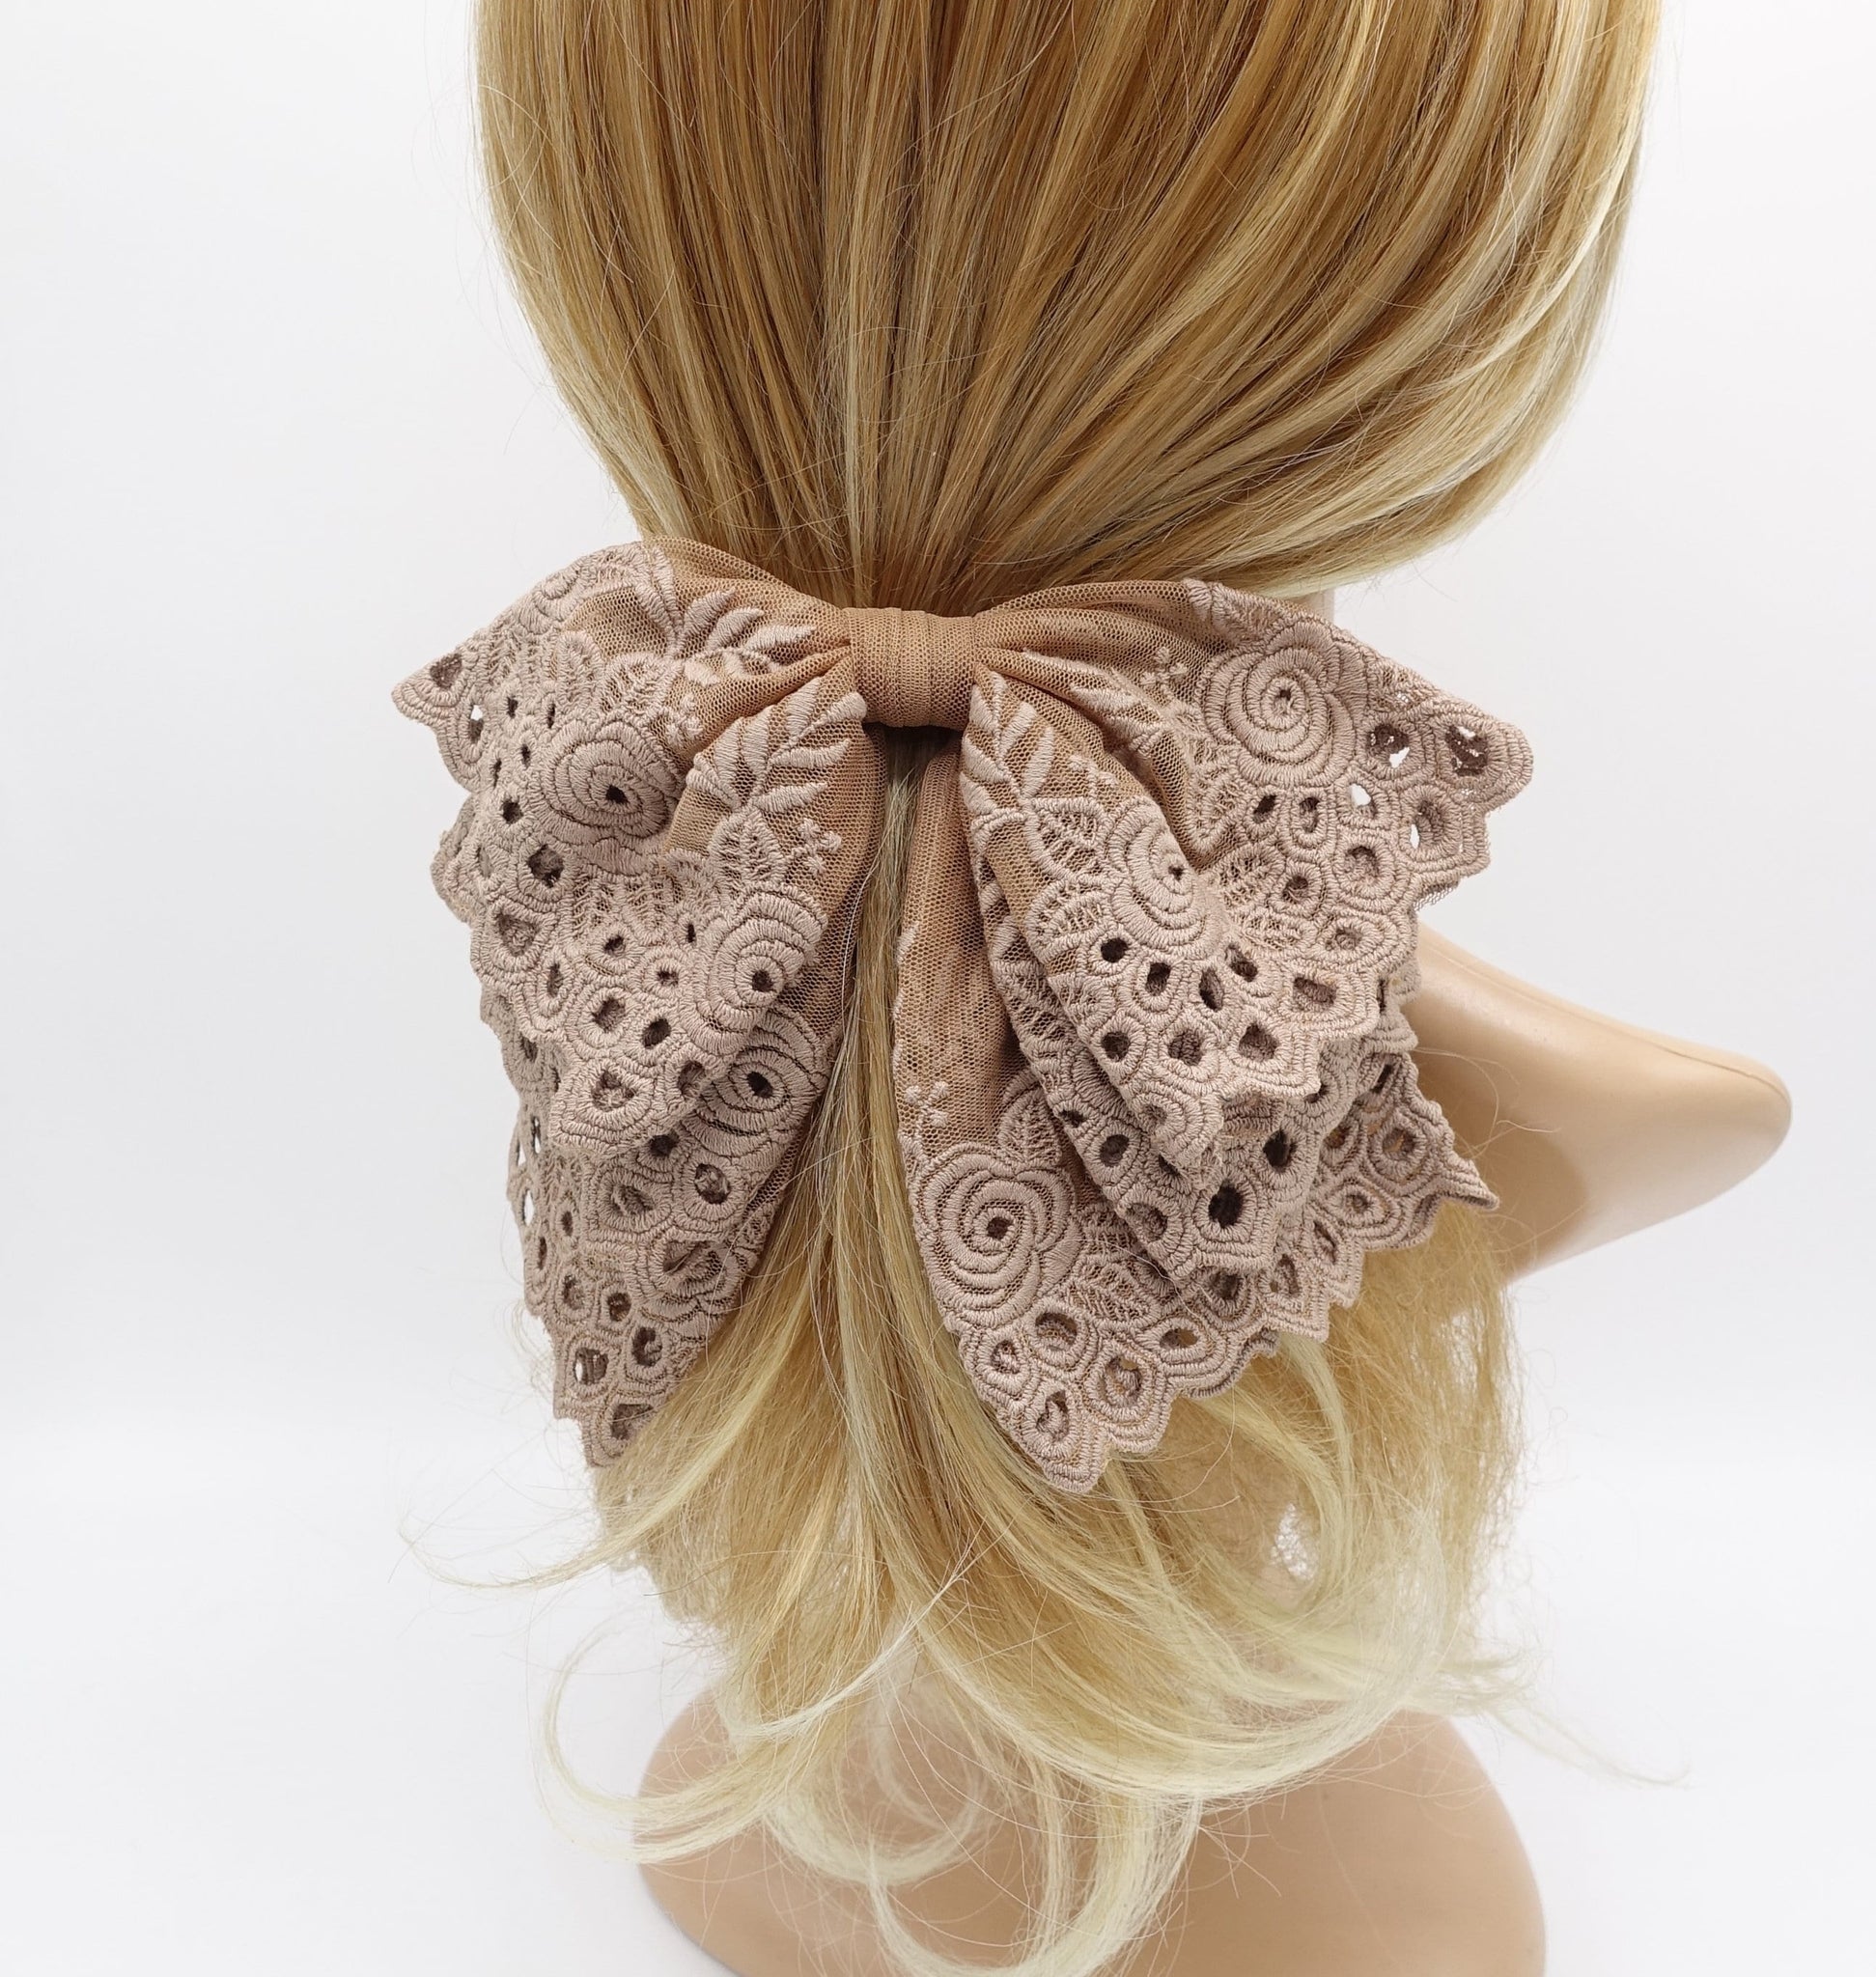 veryshine.com Barrette (Bow) lace hair bow, layered hair bow for women